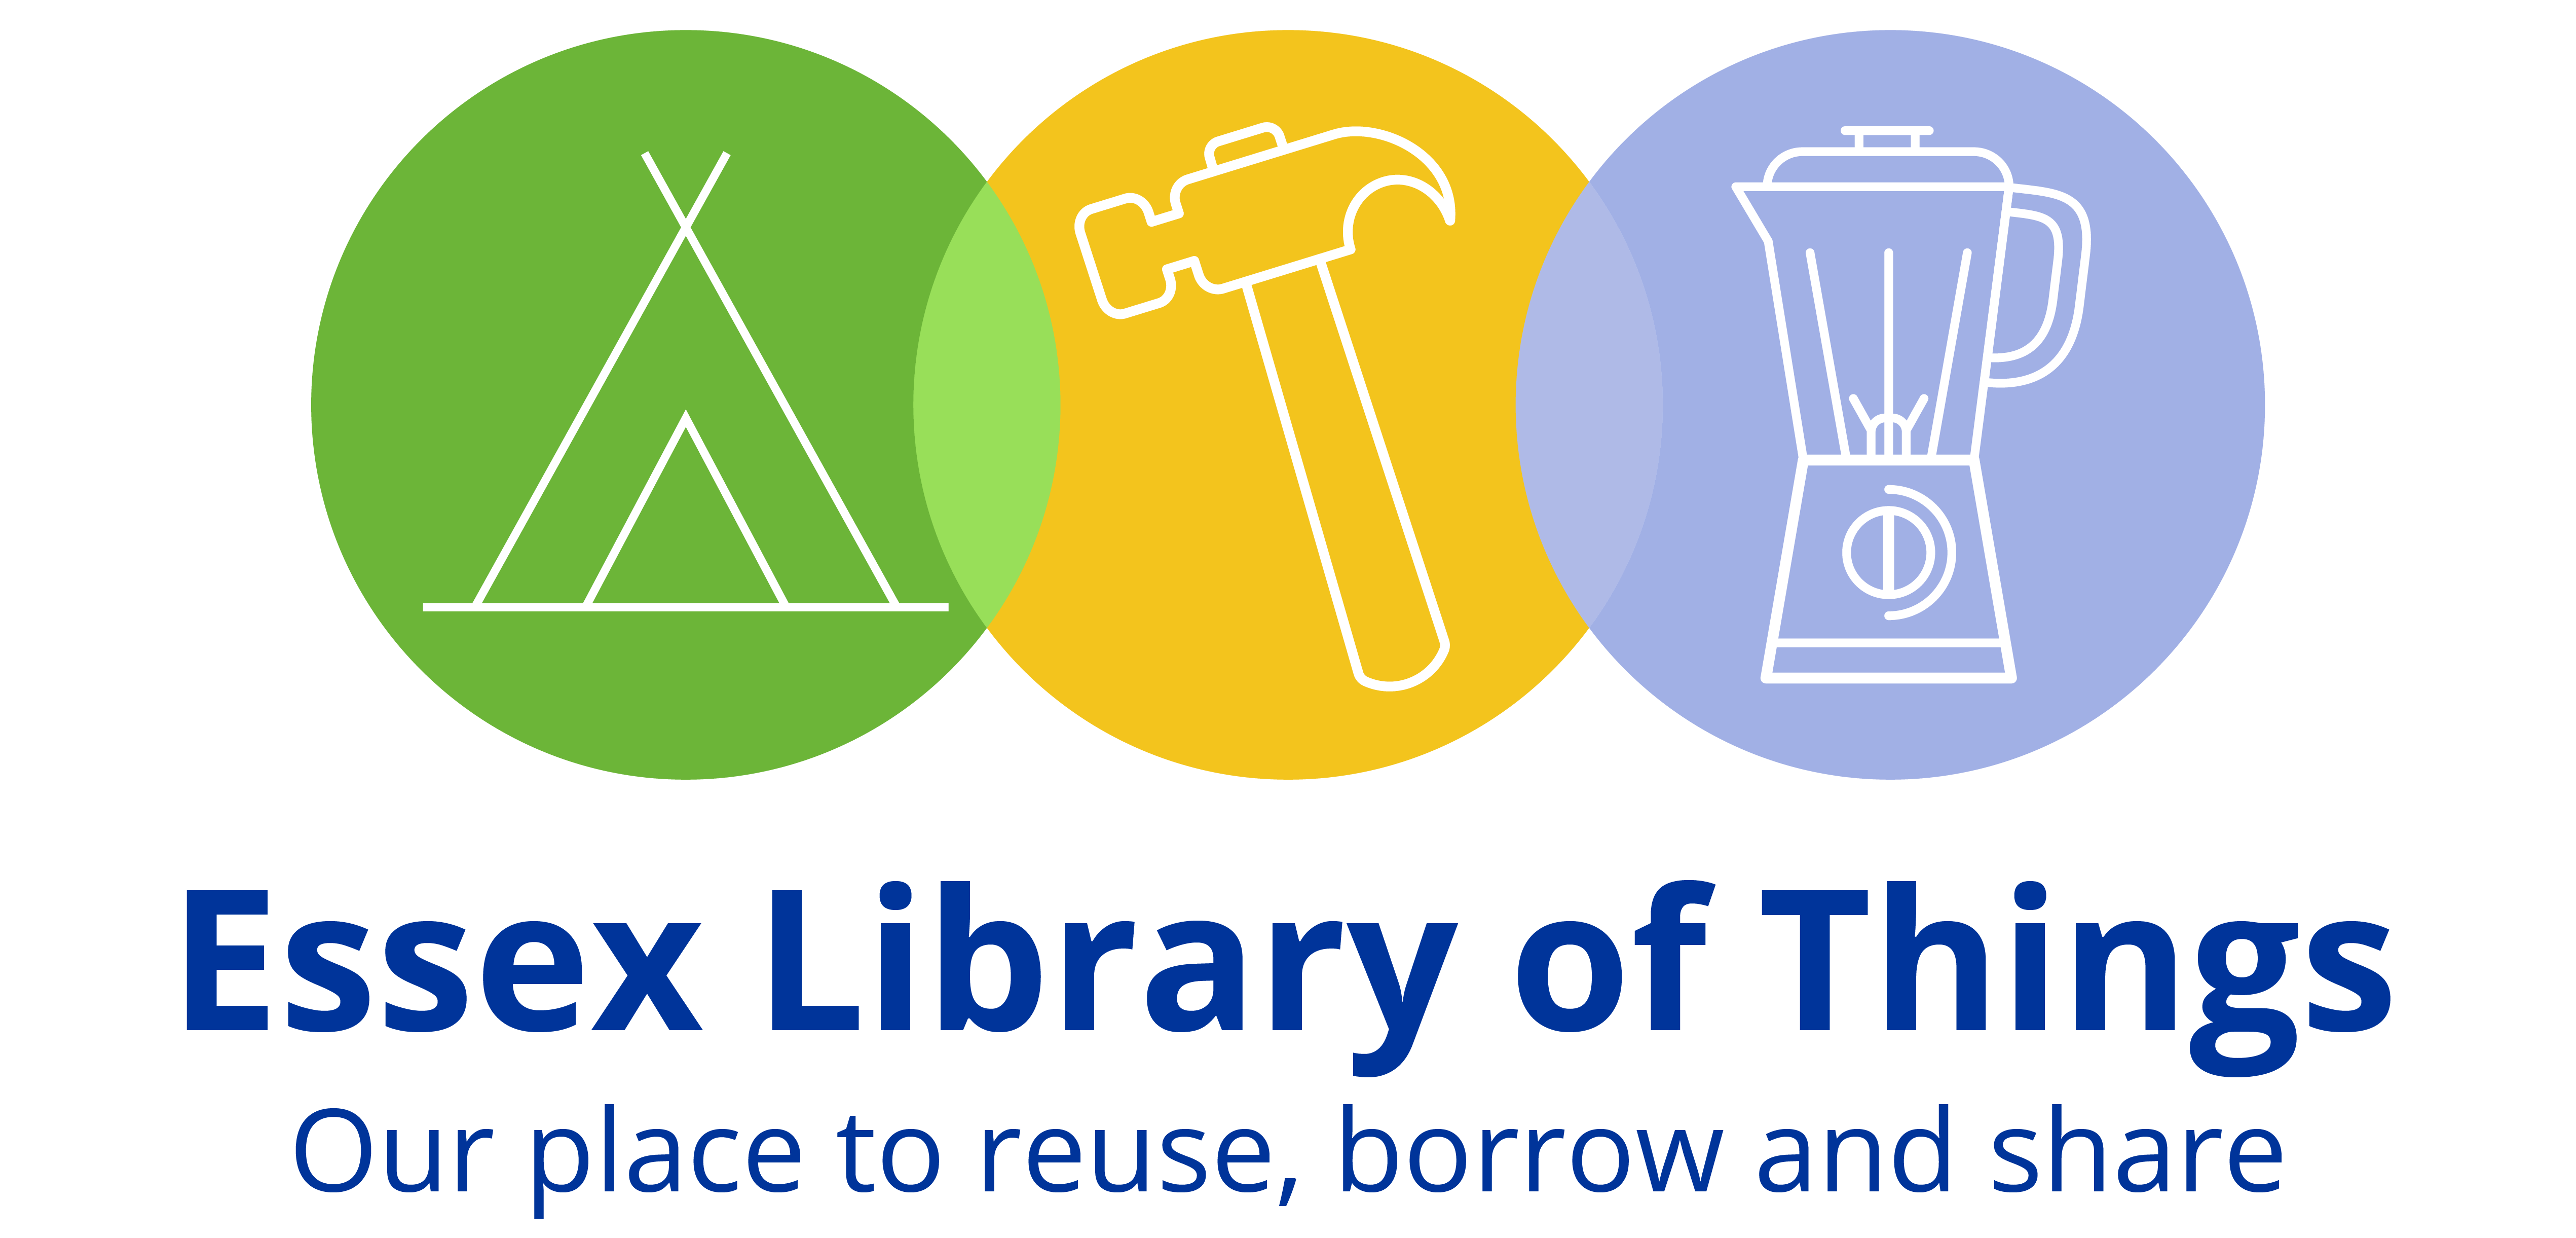 Essex Library of Things logo - our place to borrow, reuse and share